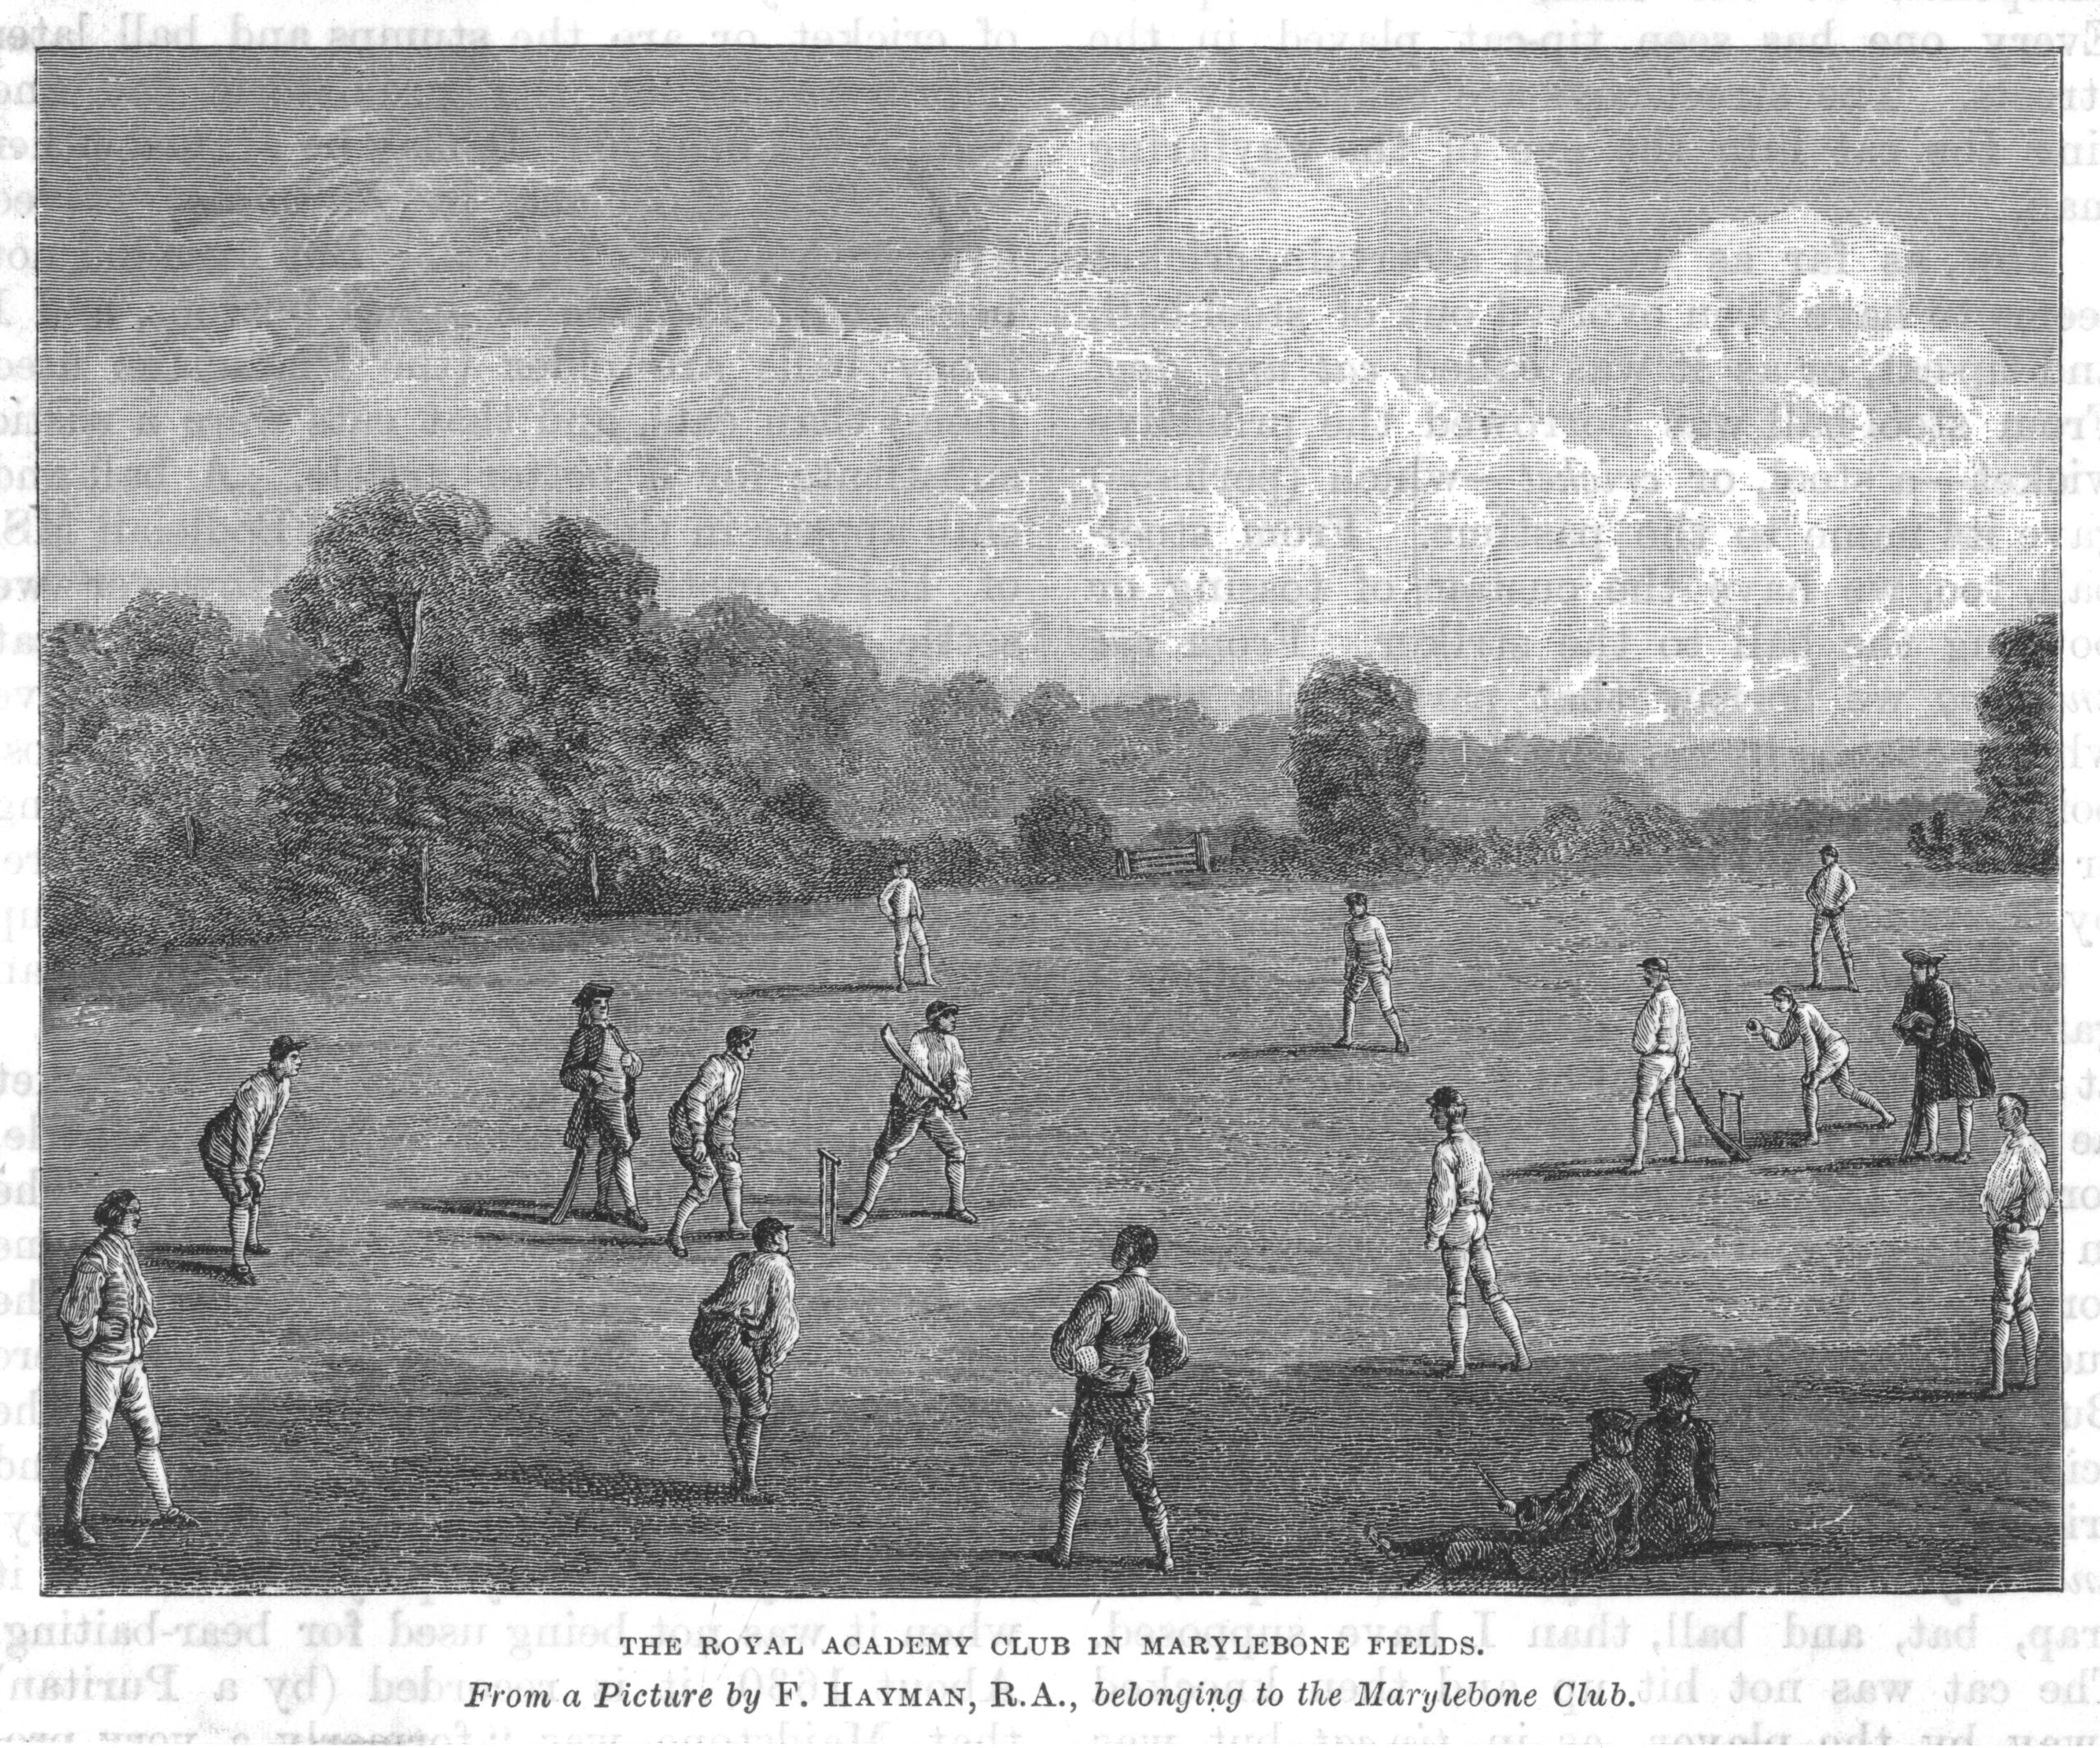 Cricket in the 18th century